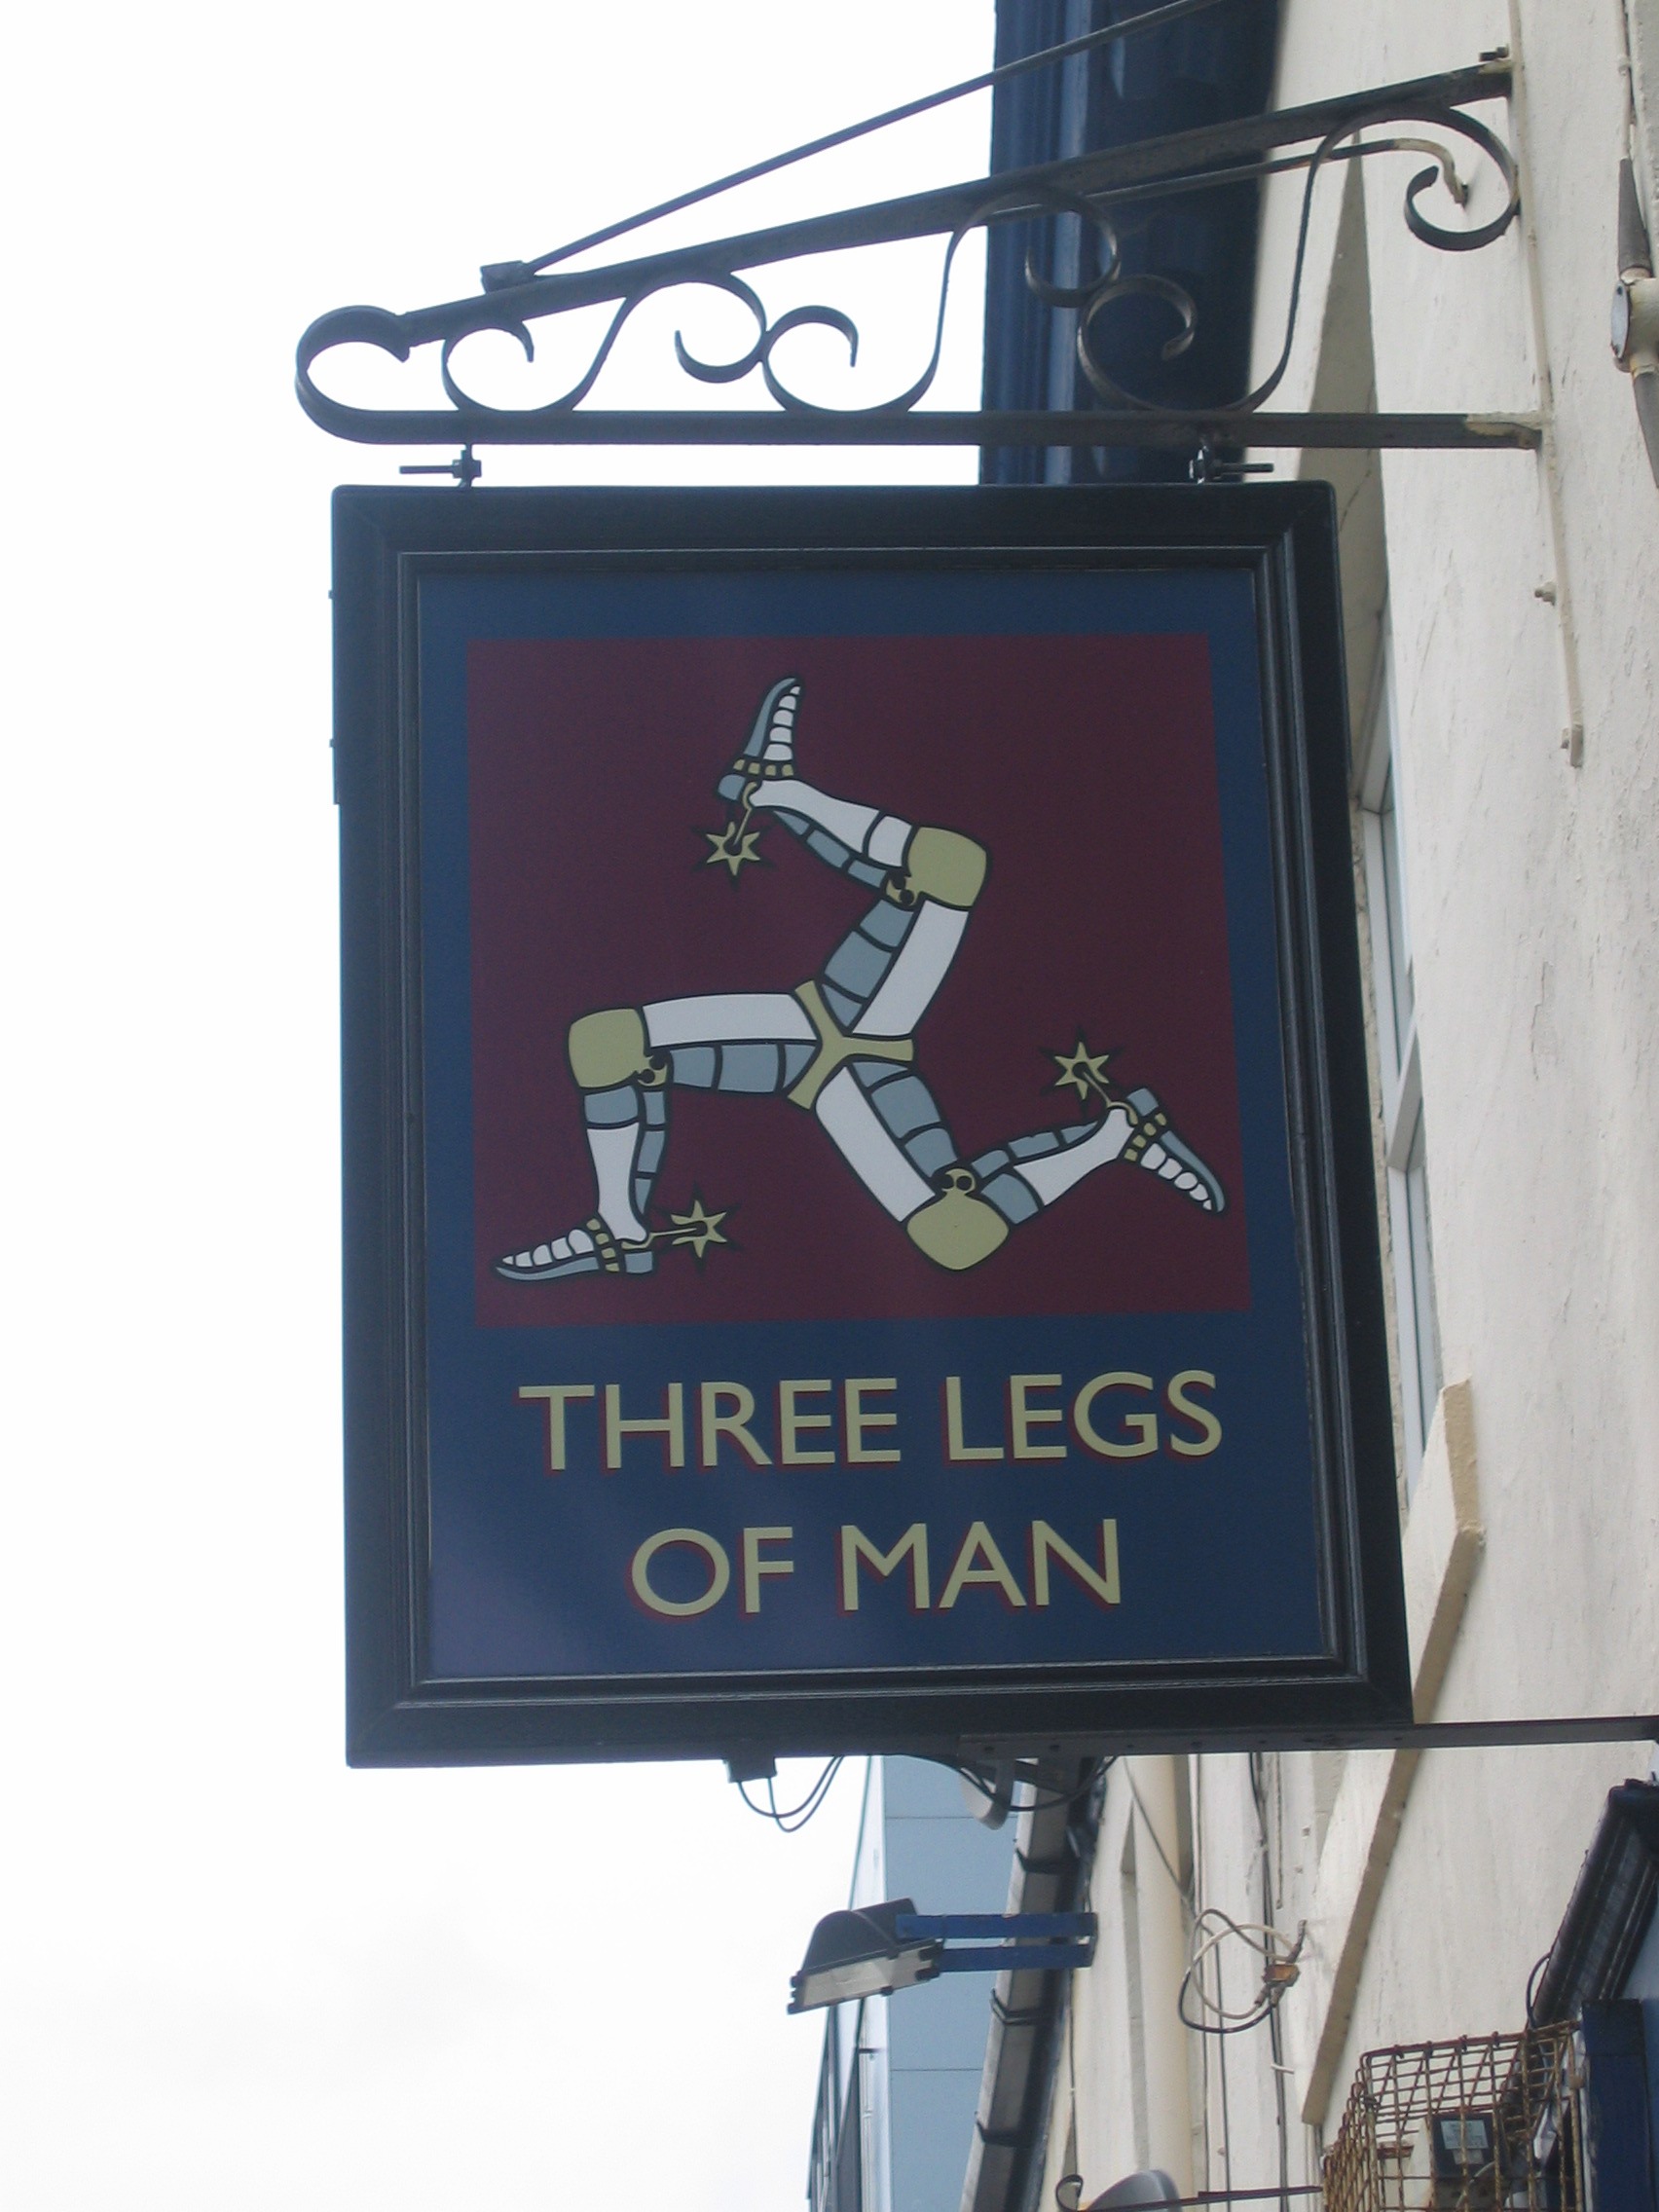 photo taken by me - The Three Legs Of man pub sign - Hulme, Manchester 